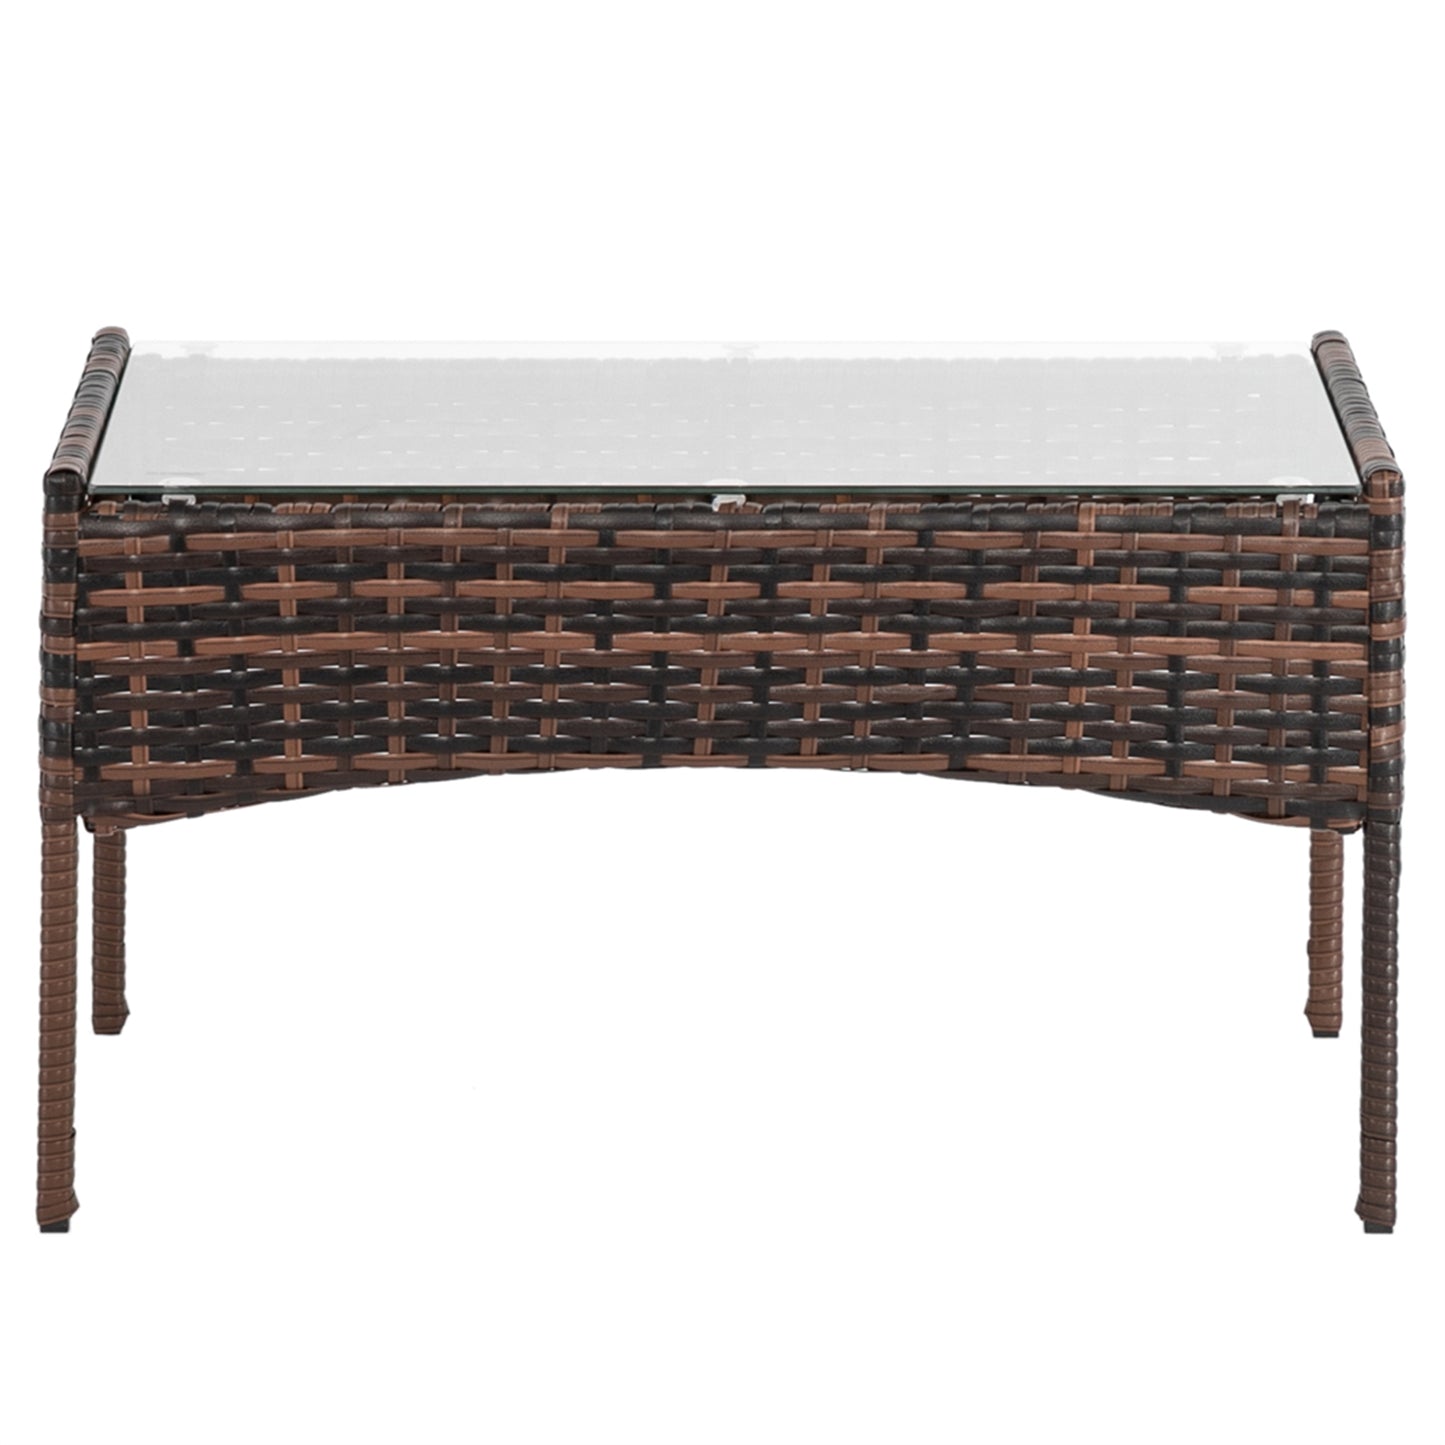 3 Seat Rattan and Coffee Table Set - Brown